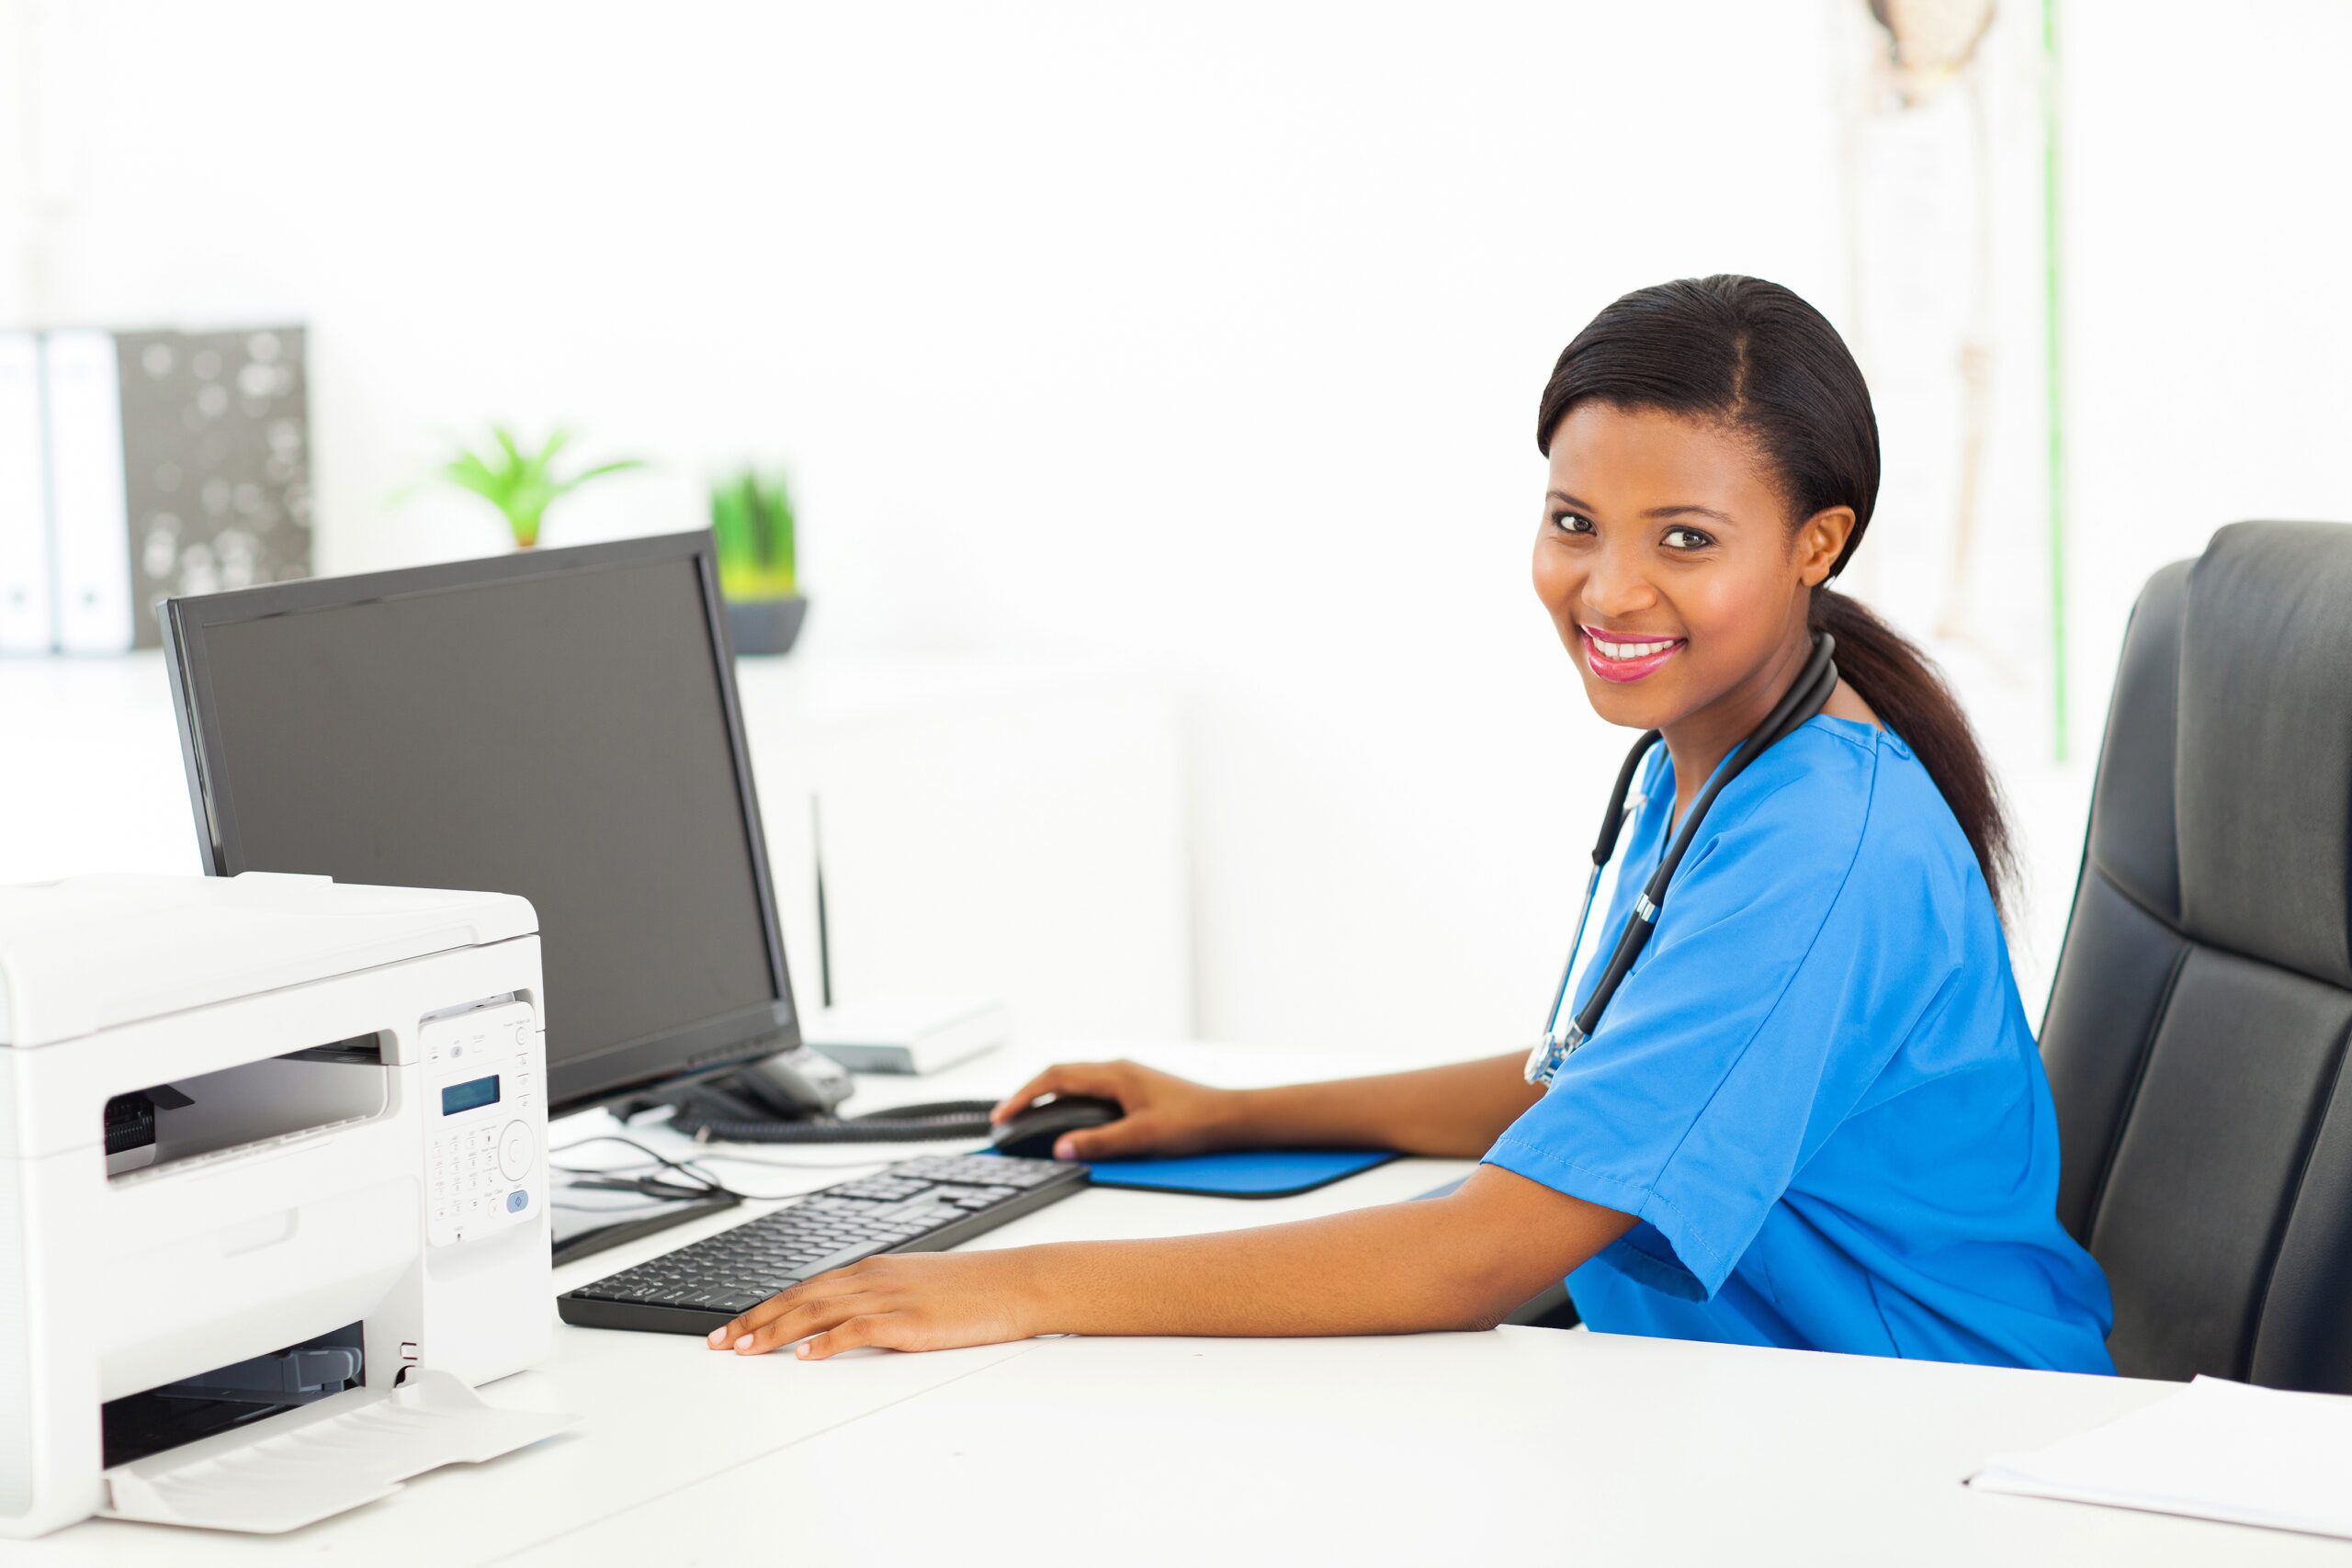 Learn More about Medical Billing and Coding Career Training at Integrity College of Health!